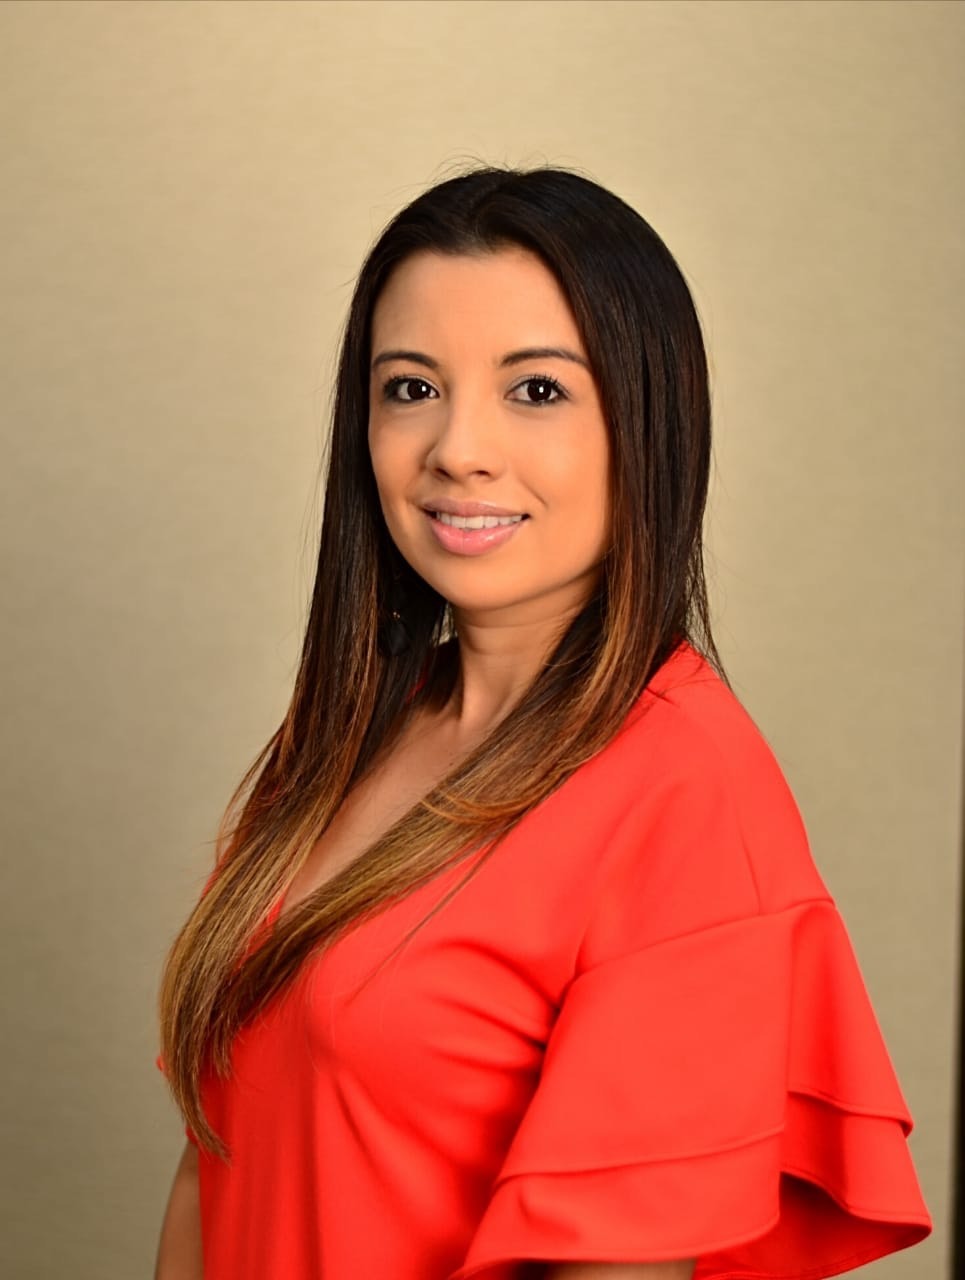 Charmex appoints Carolina Triana as the new head of Sales in Latin America